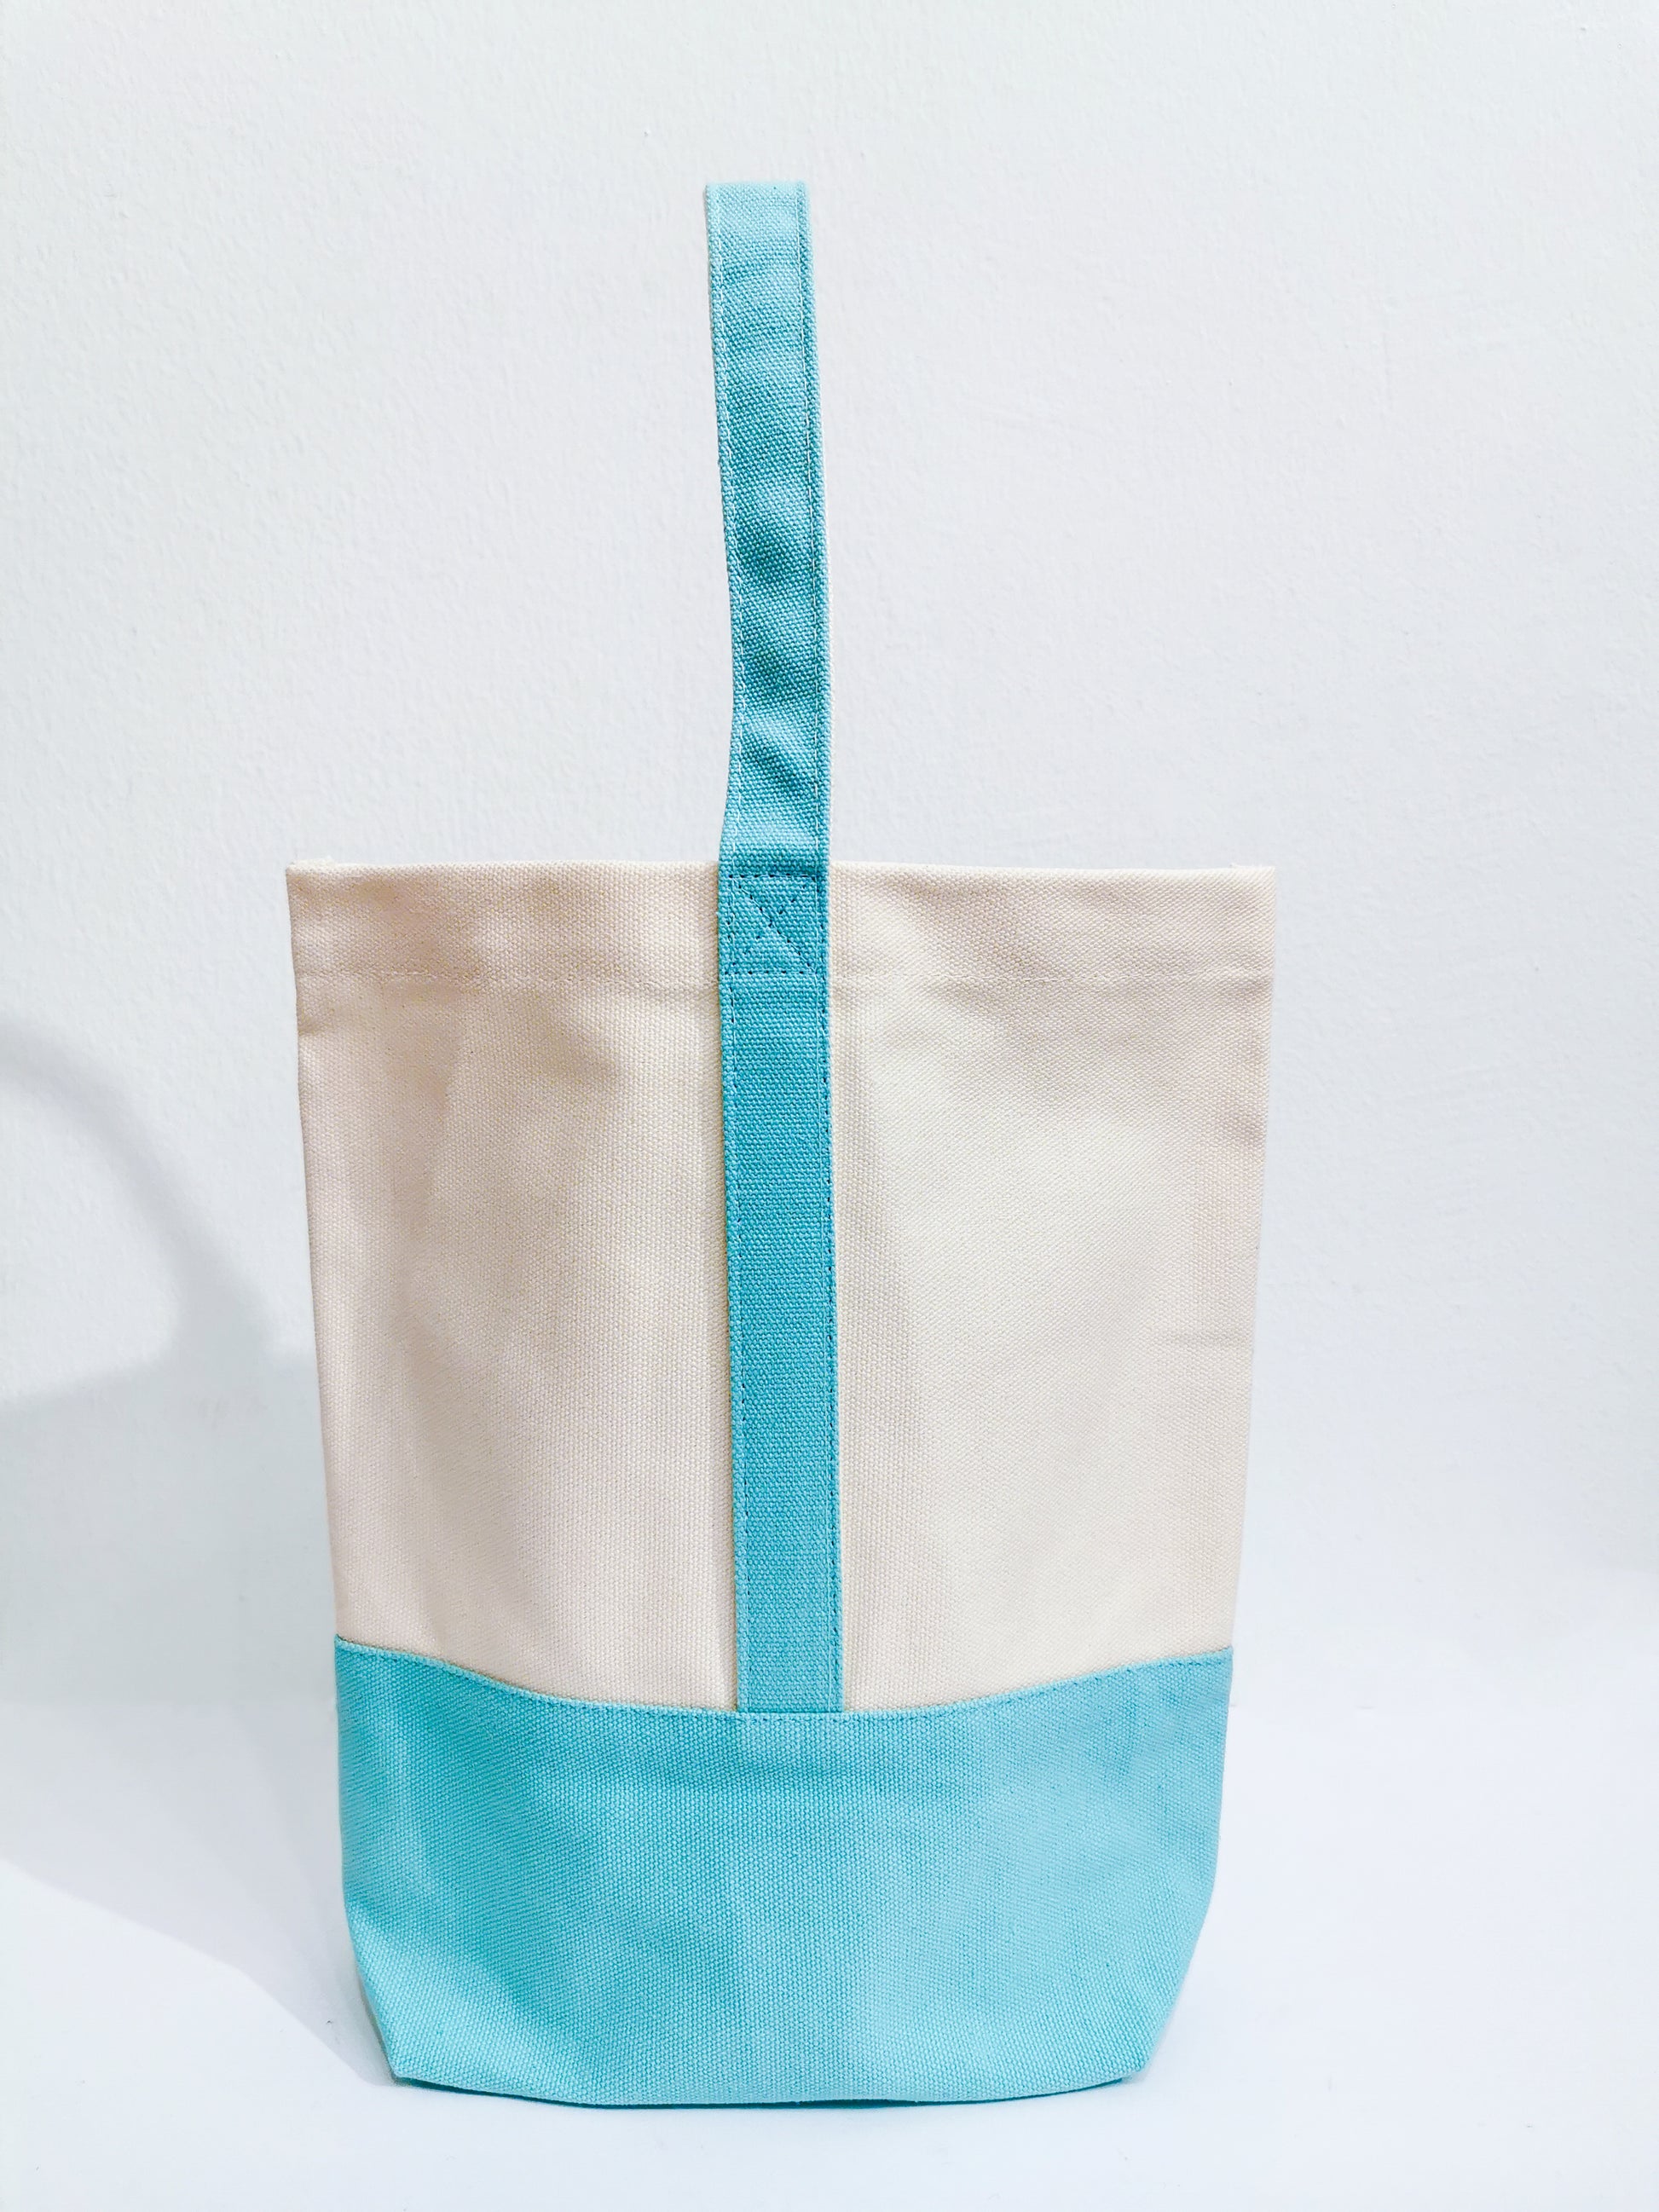 Duo Wine Bag - Tiffany Blue - Gifts by Art Tree